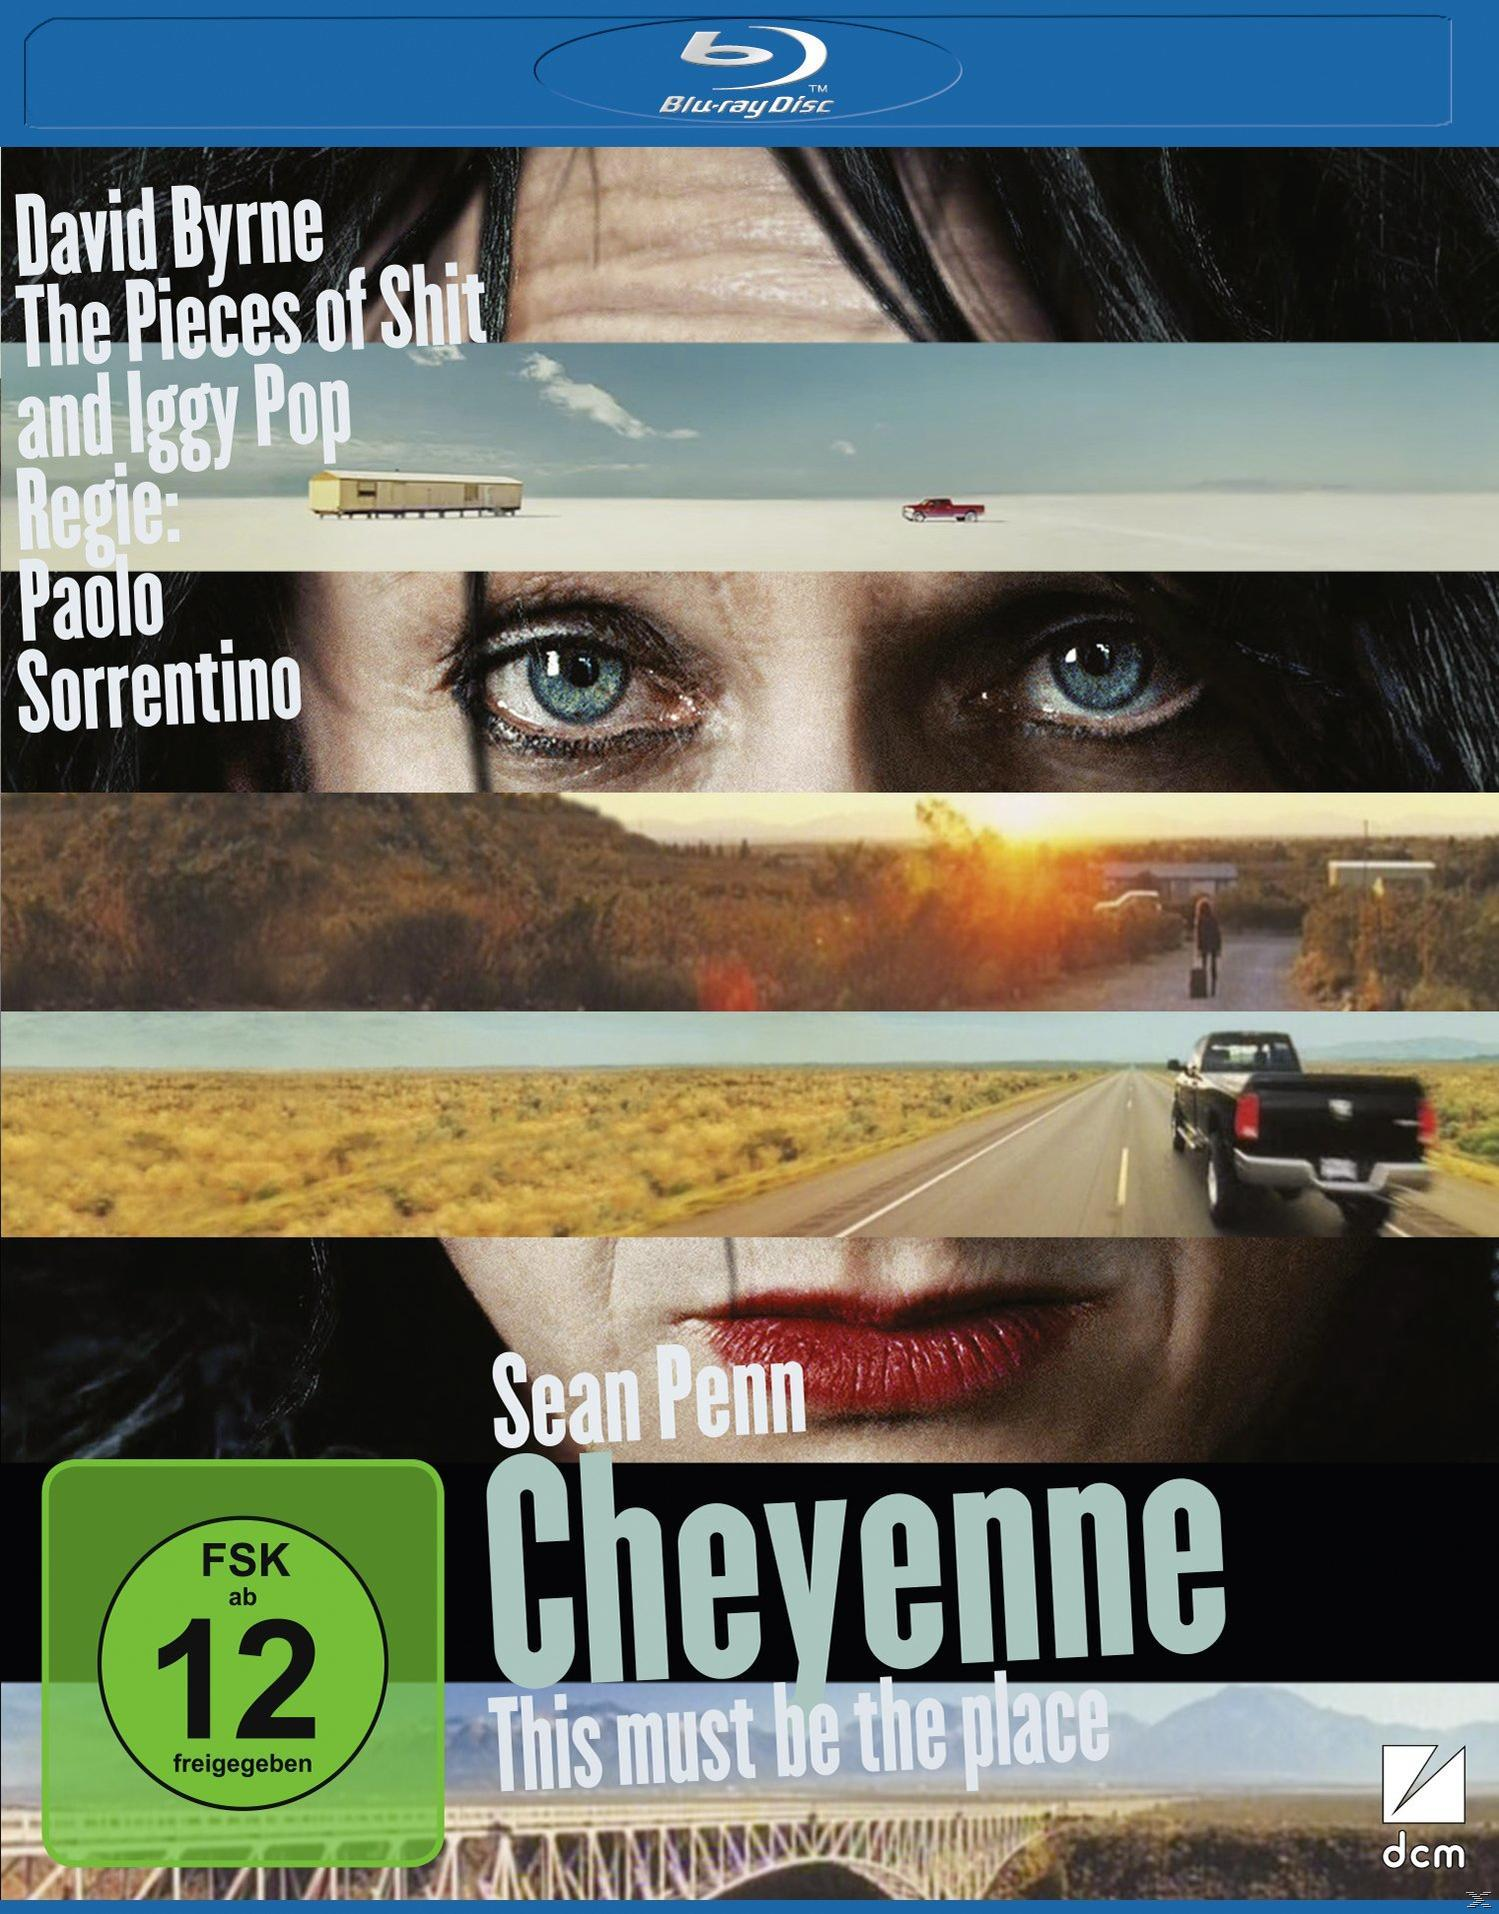 the Cheyenne place Blu-ray This must be -